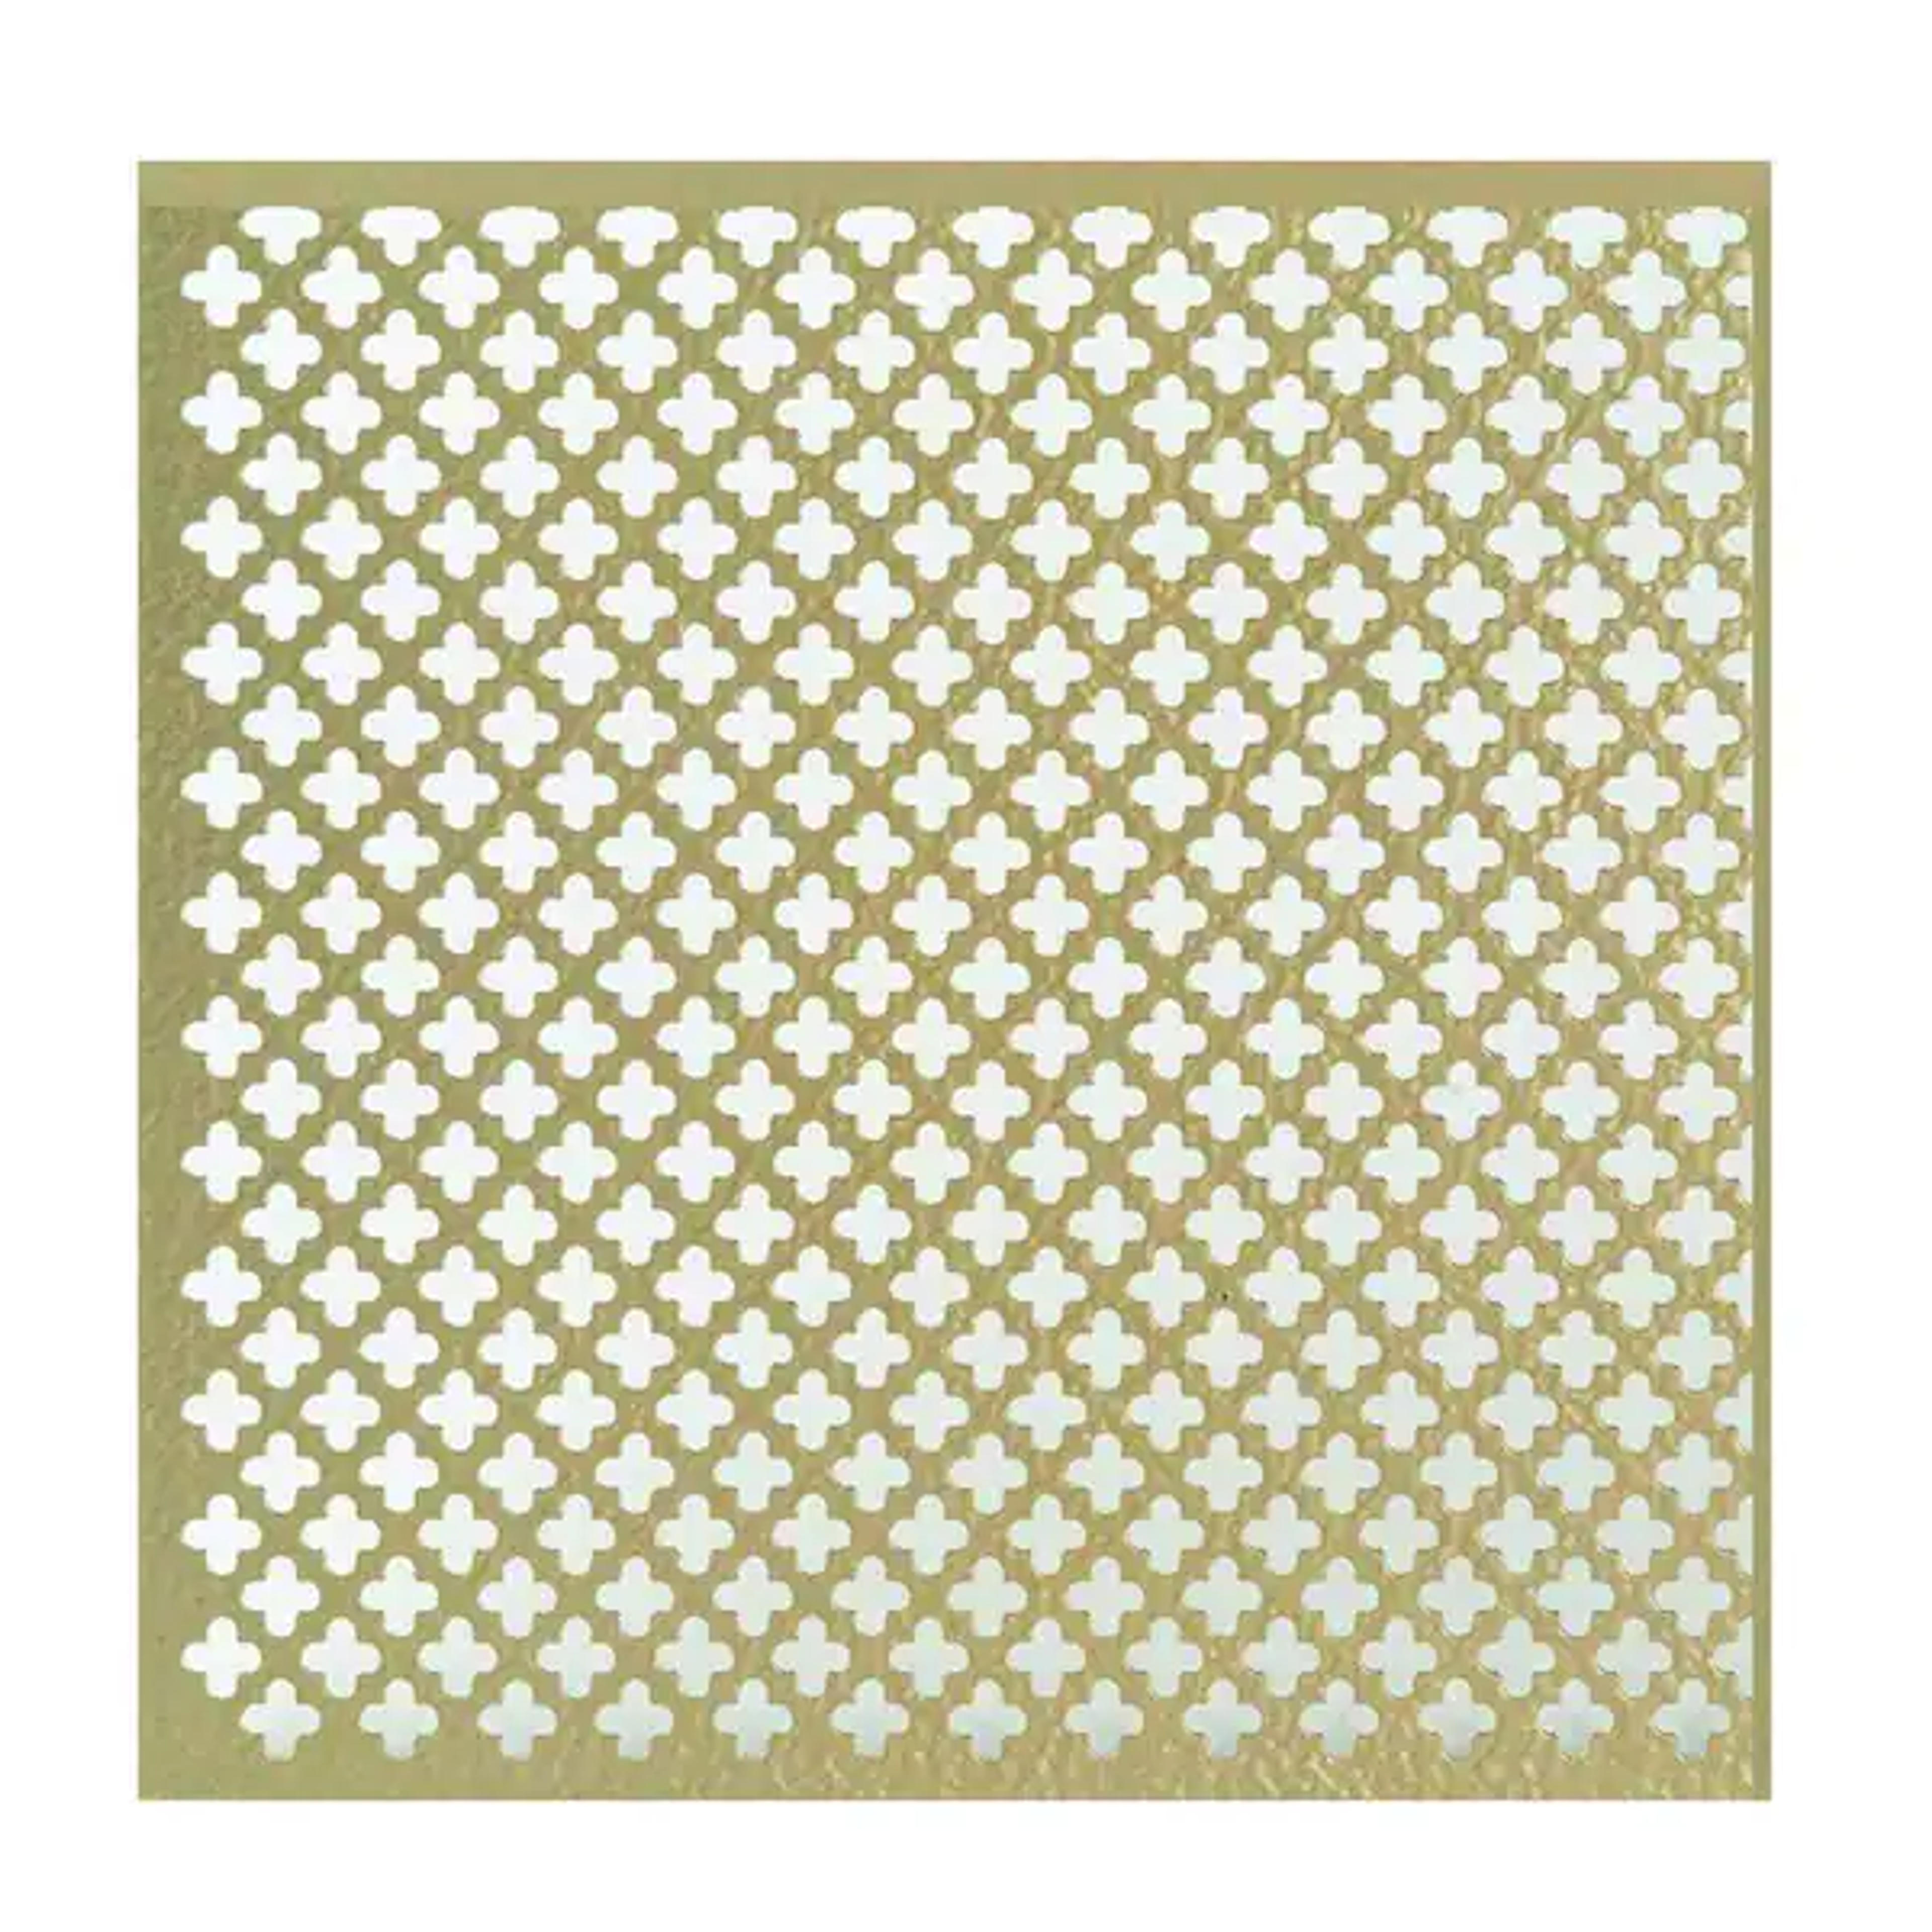 M-D Building Products 36 in. x 36 in. Cloverleaf Aluminum Sheet in Brass 57240 - The Home Depot